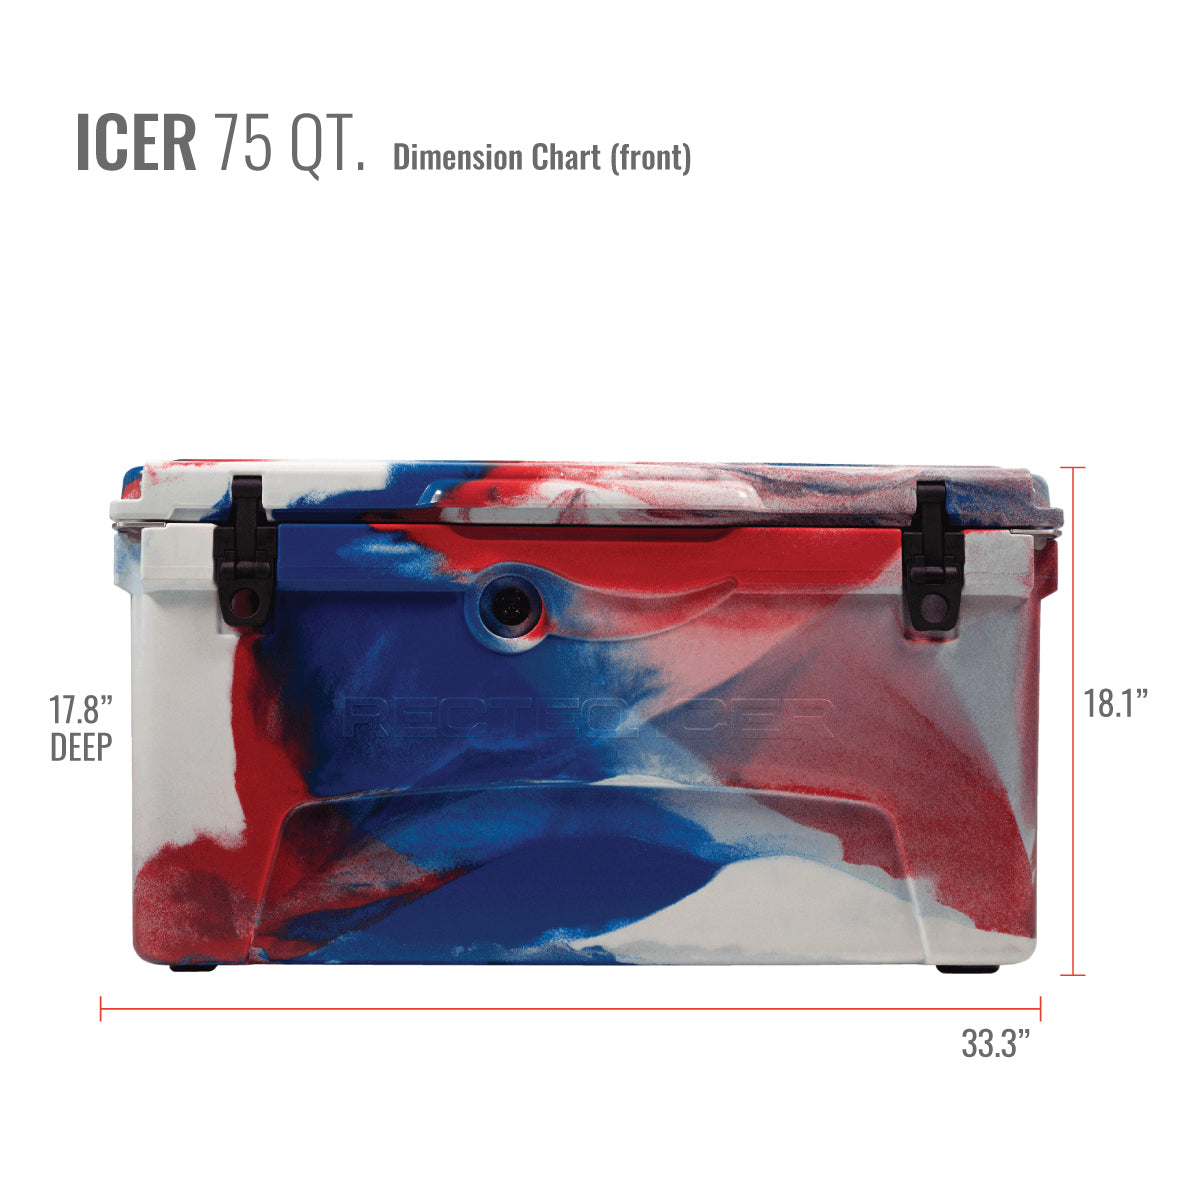 Limited Edition Yeti Cooler Package (Rescue Red)